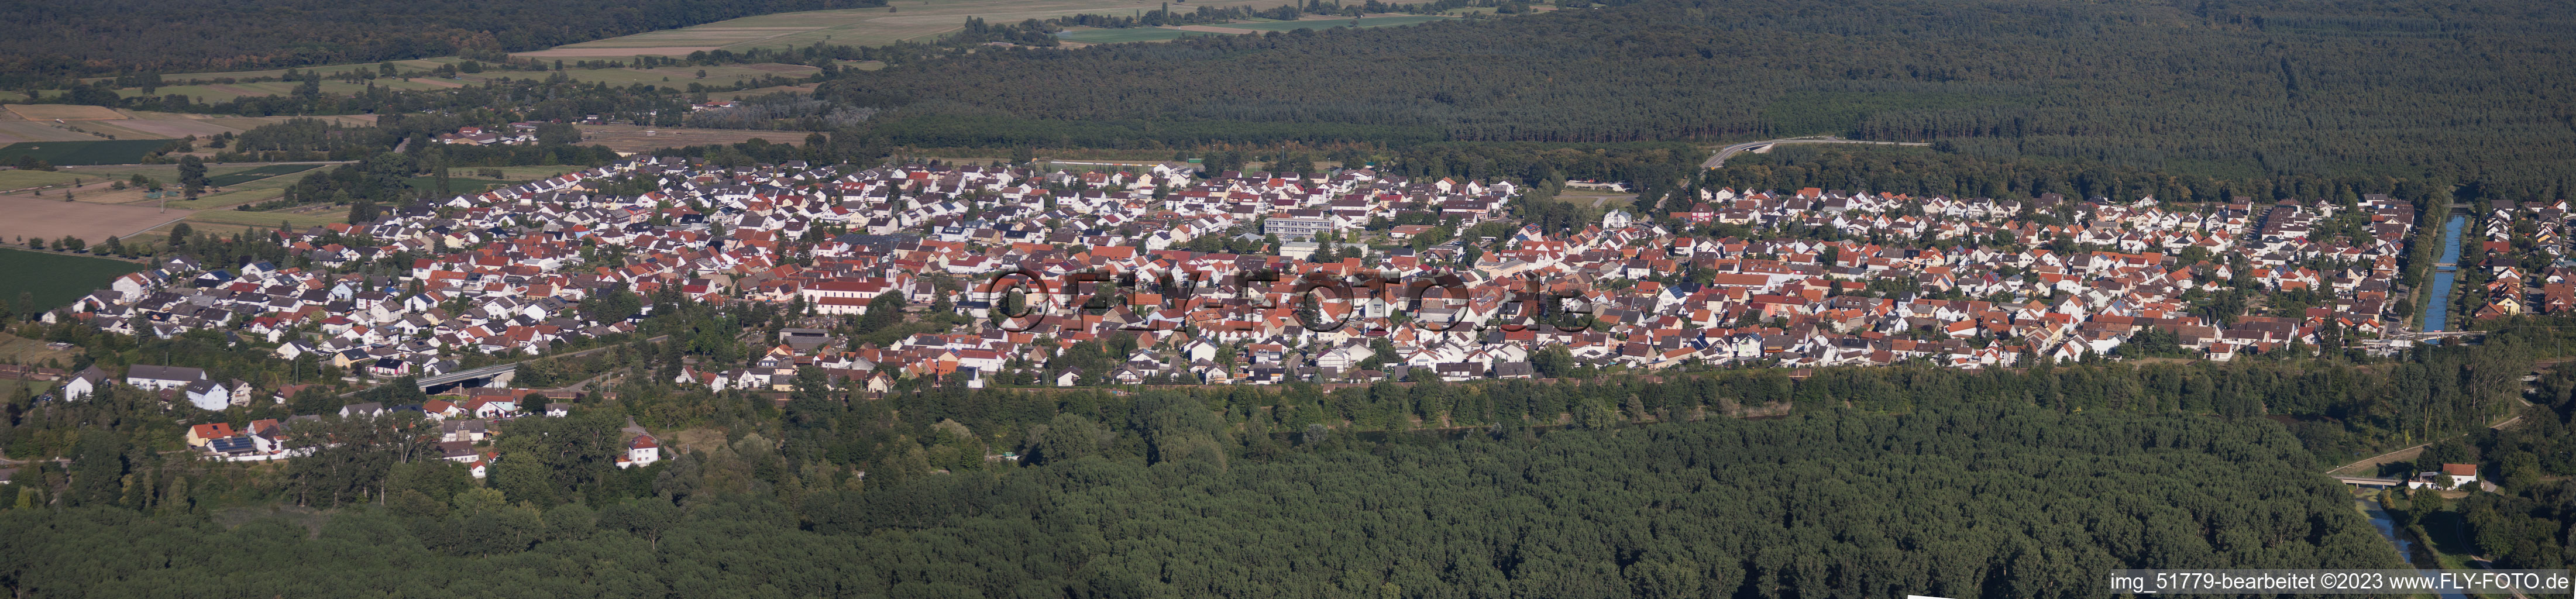 Panorama in the district Neudorf in Graben-Neudorf in the state Baden-Wuerttemberg, Germany